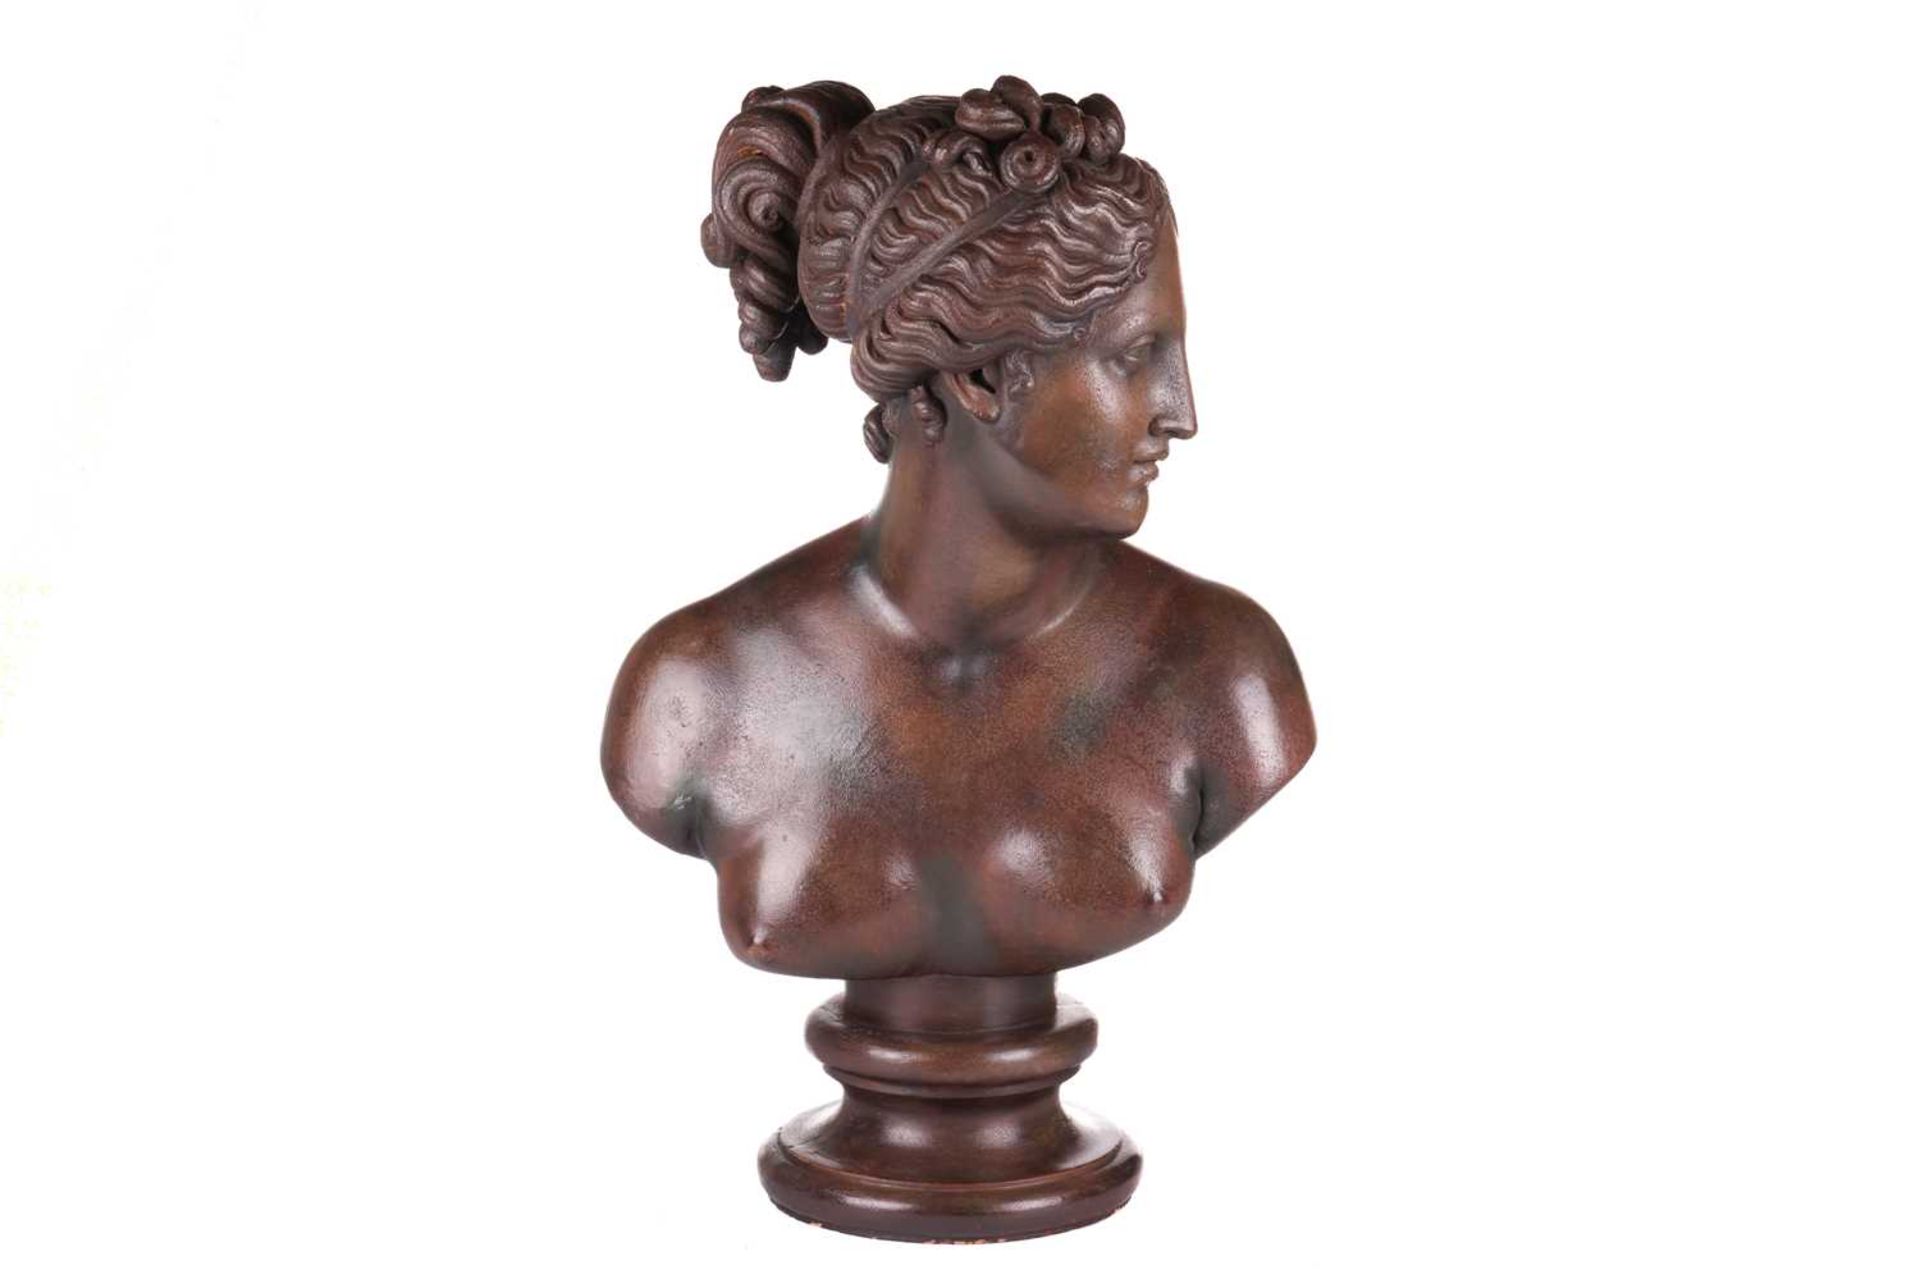 After the antique, a large eathernware and composite bust of Diana, with bronzed finish, on an inter